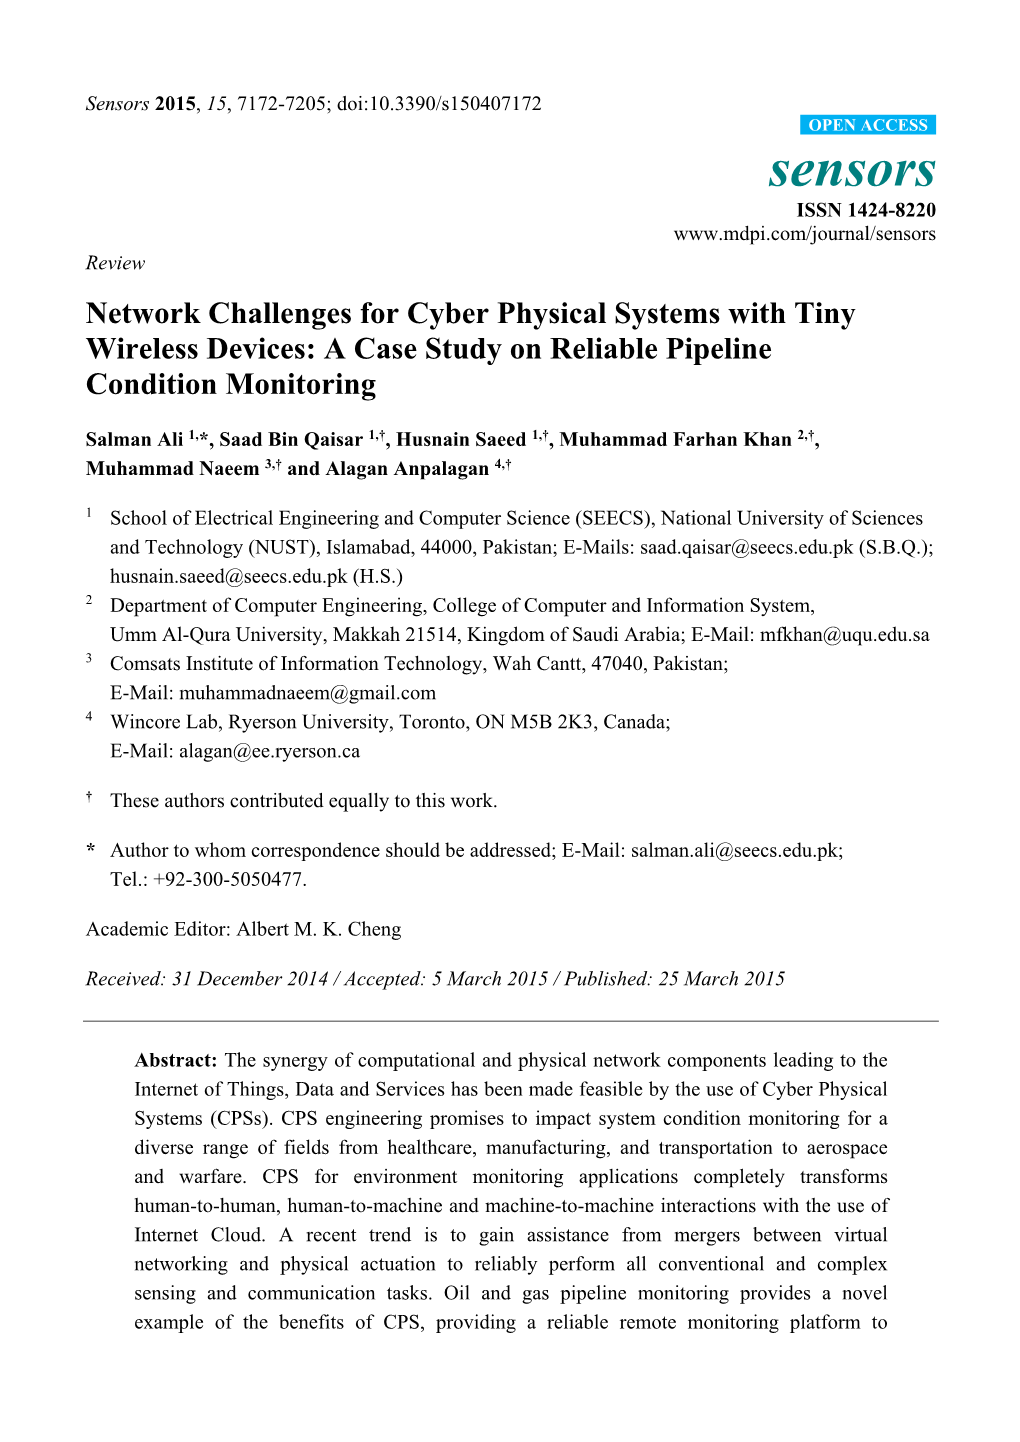 Network Challenges for Cyber Physical Systems with Tiny Wireless Devices: a Case Study on Reliable Pipeline Condition Monitoring